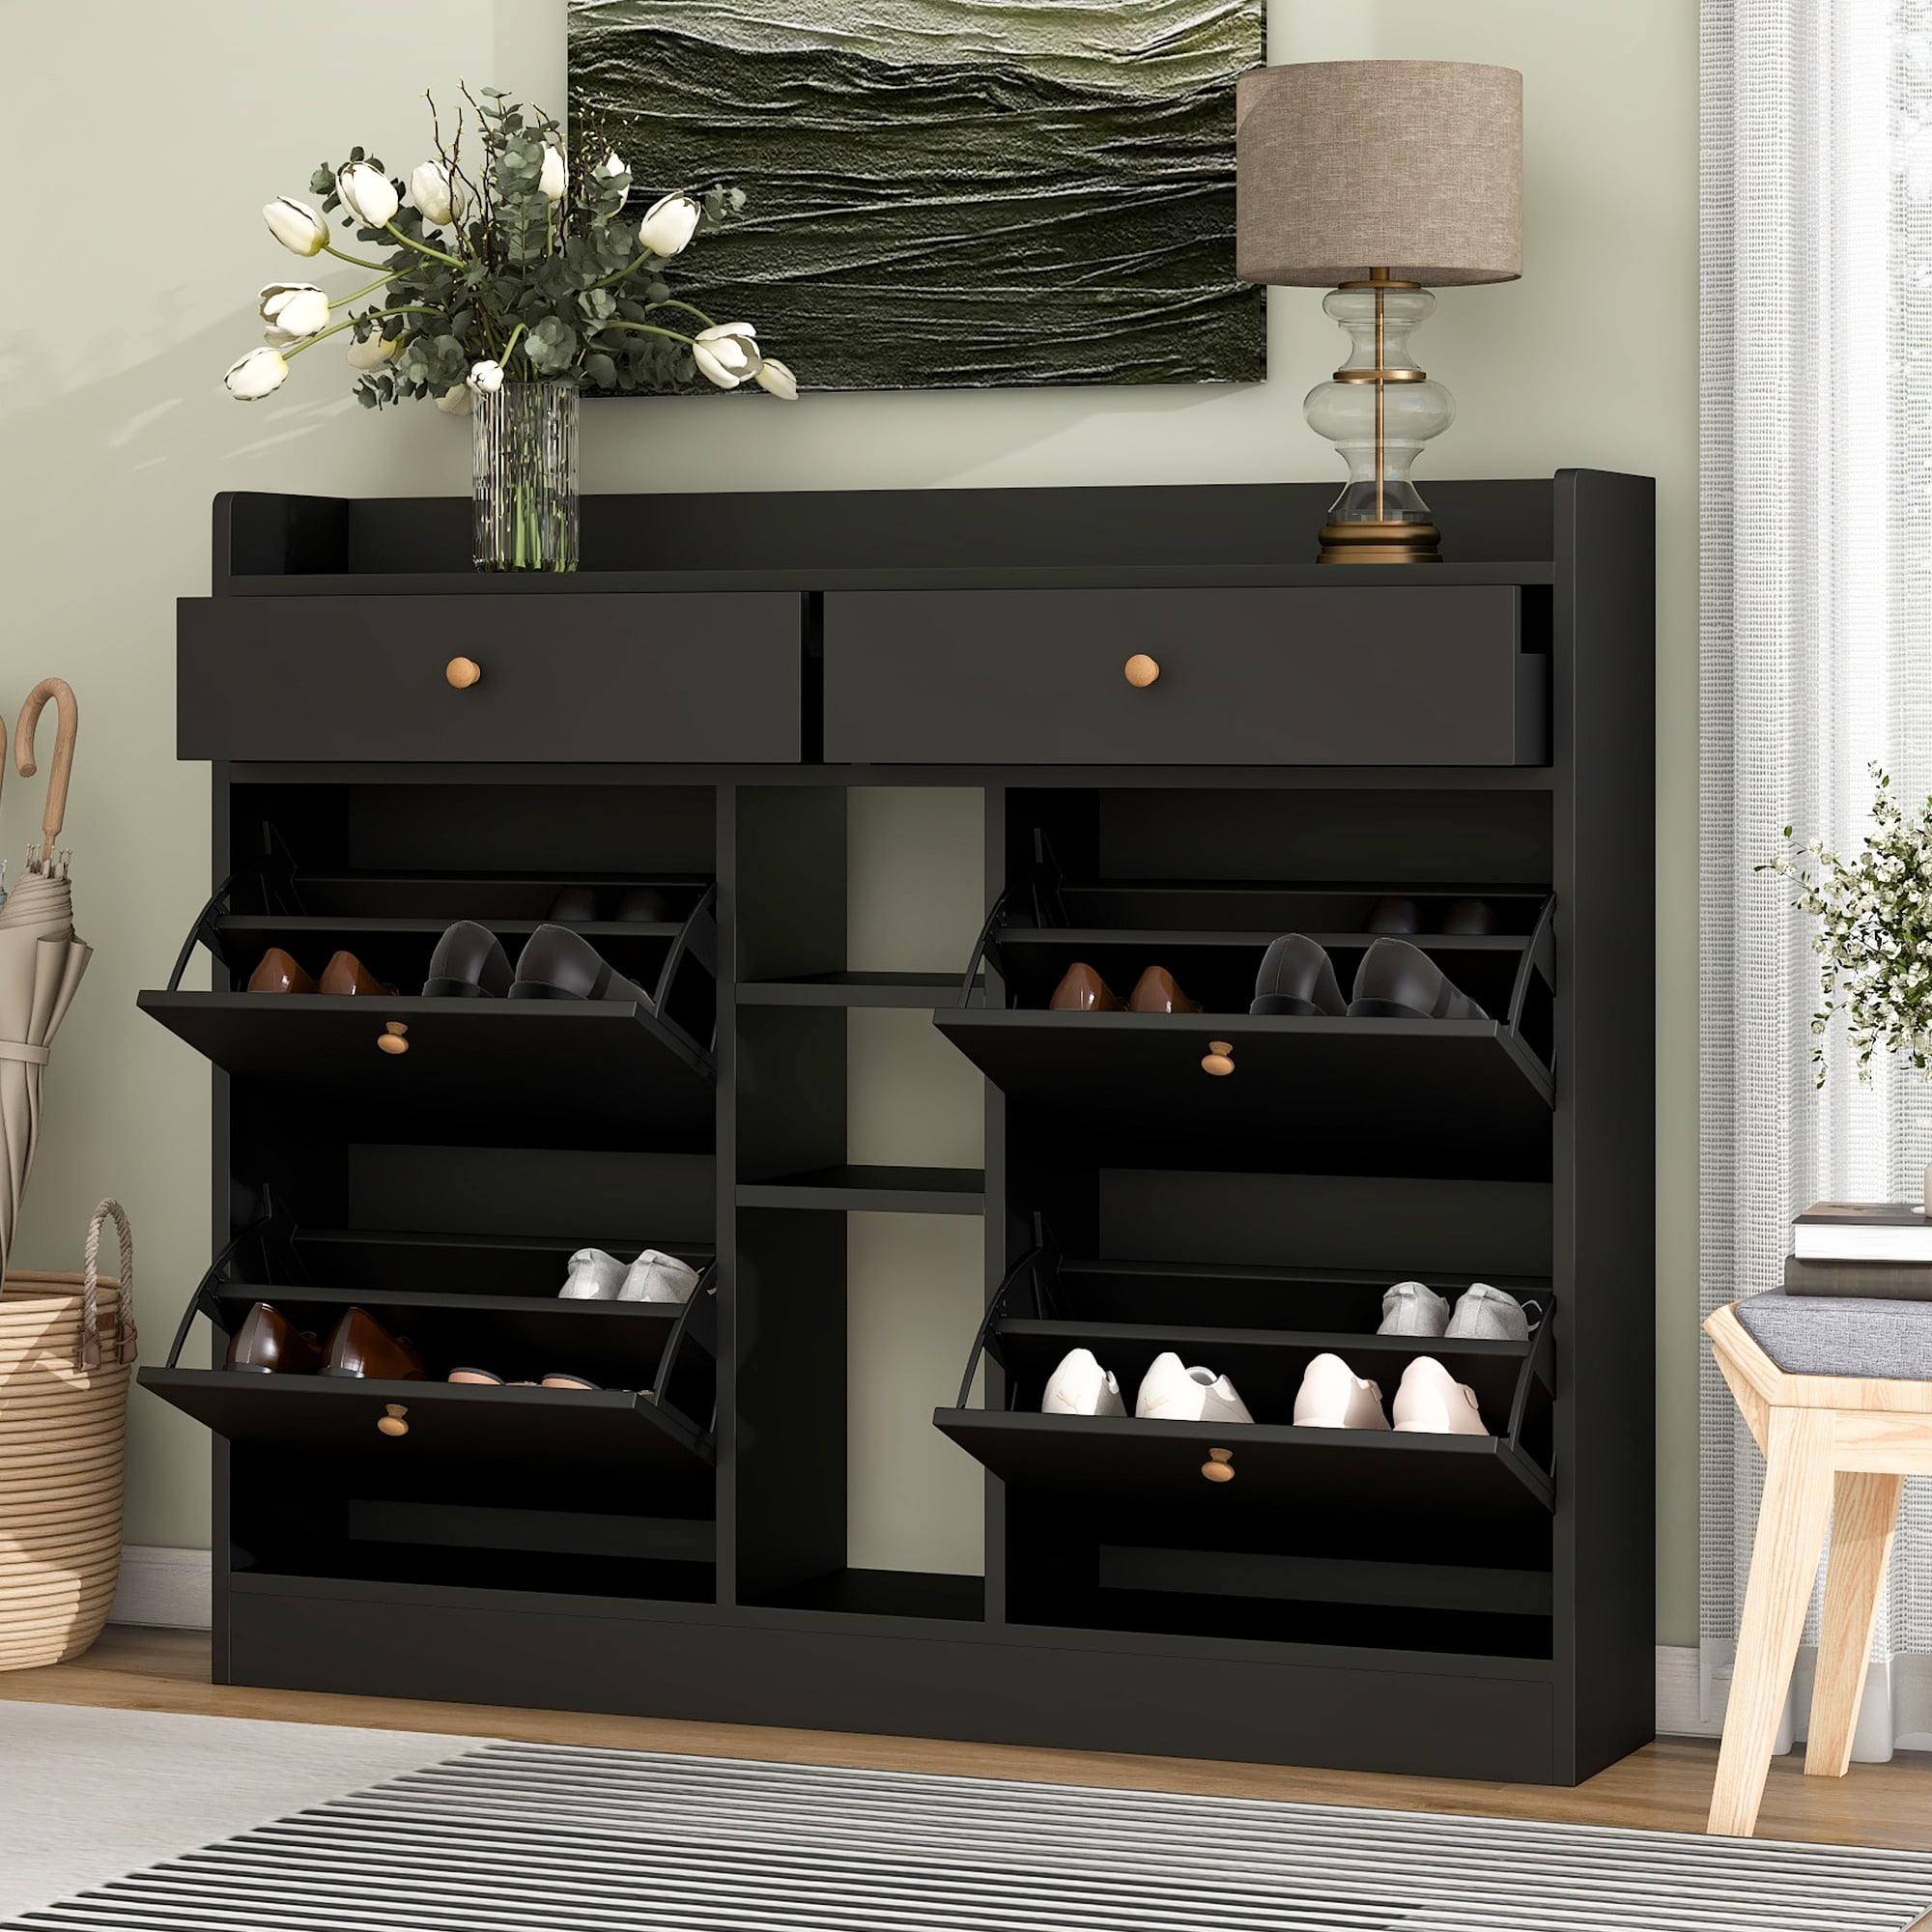 Modern Shoe Cabinet Gray & Black Shoe Organizer with Doors Shelves Drawer  in Small-Wehomz